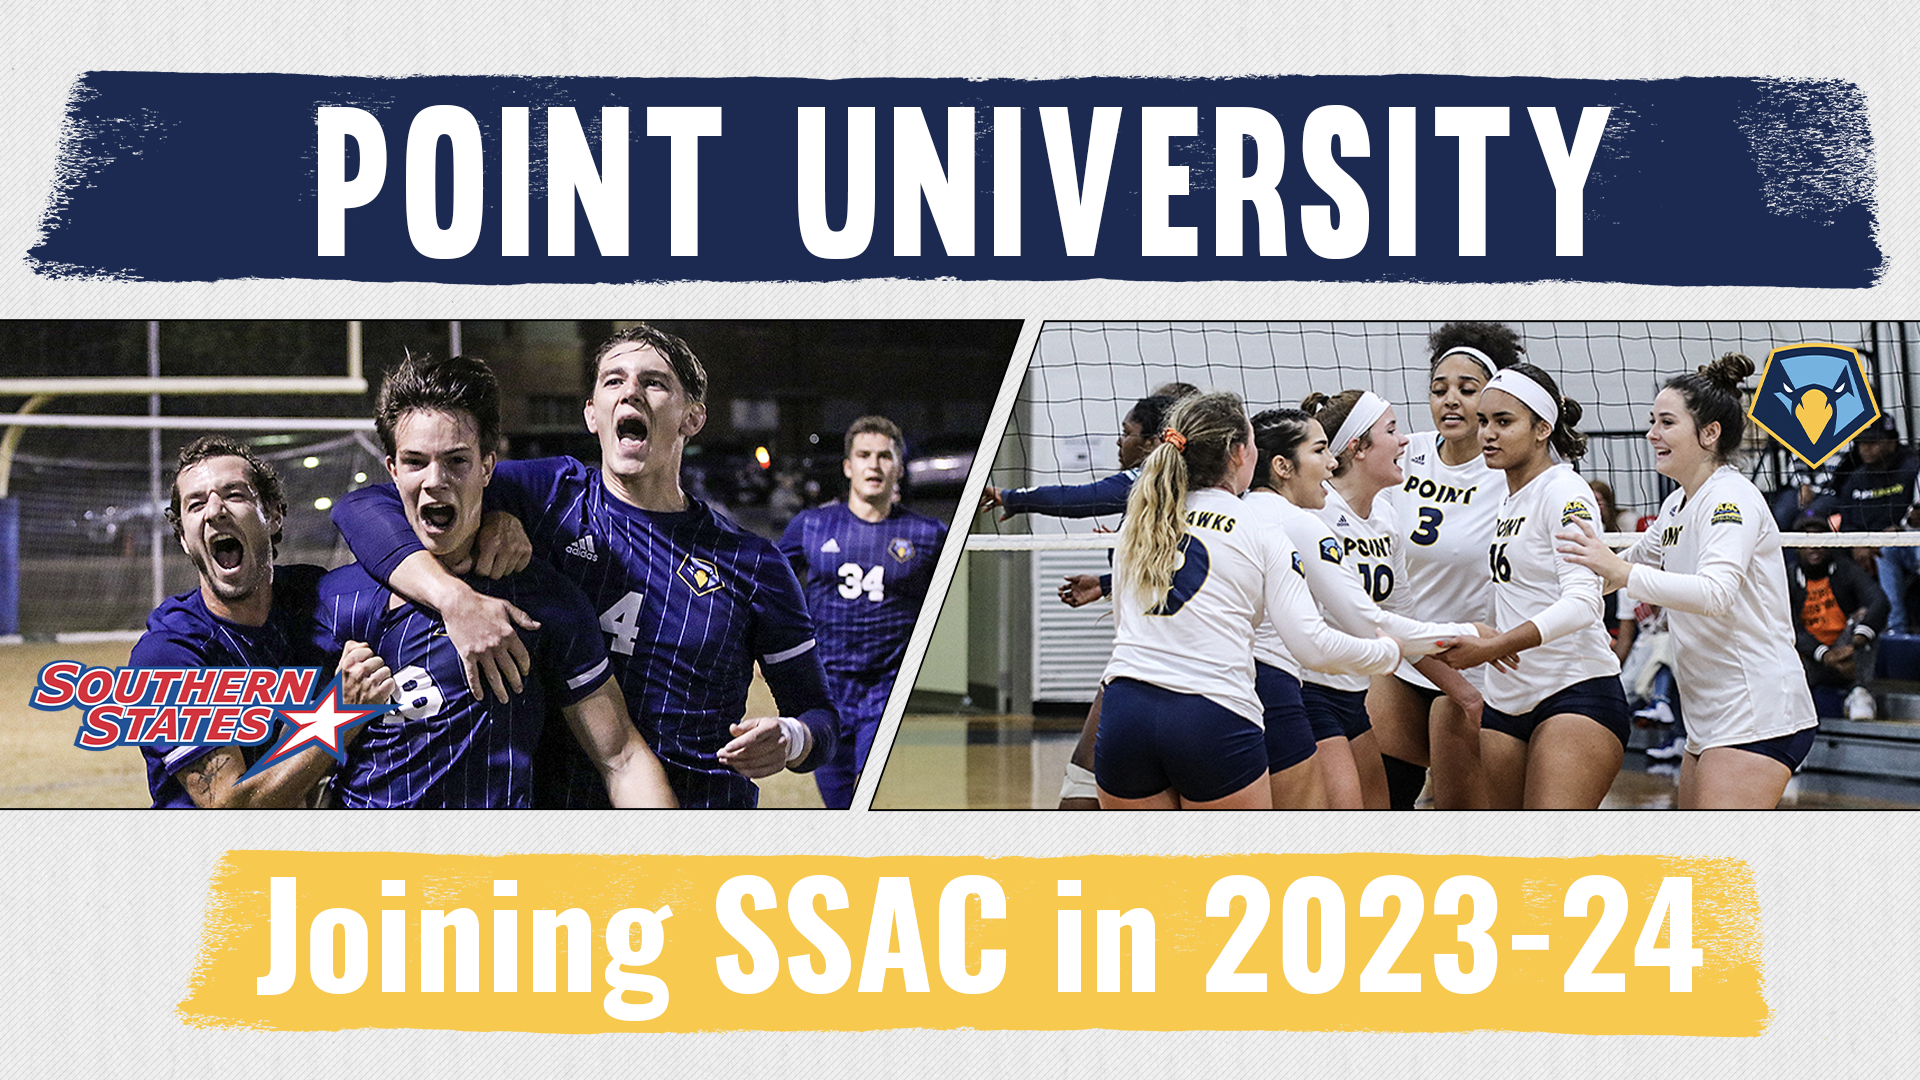 Point to join Southern States Athletic Conference in 2023-24